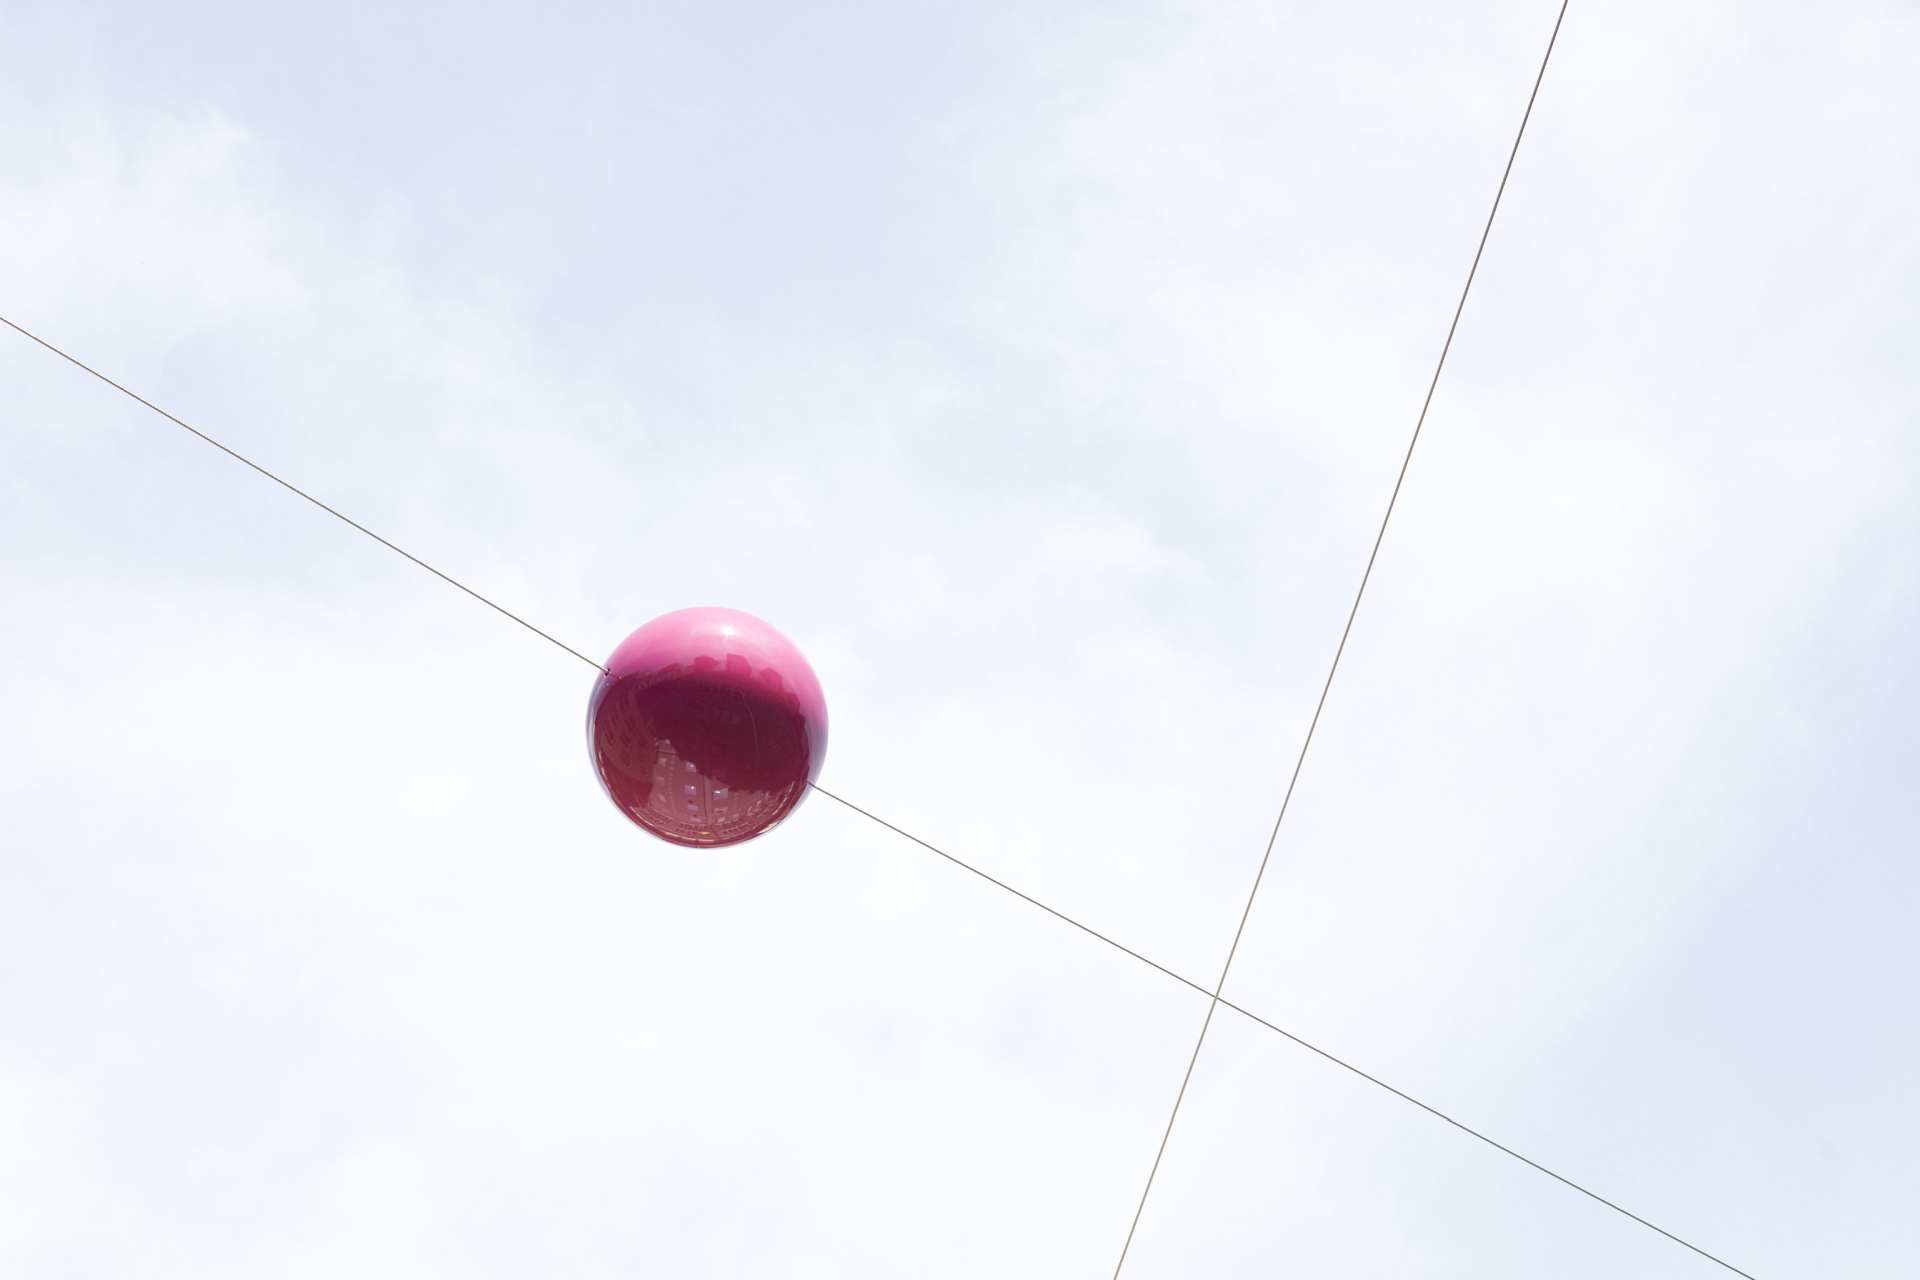 The red plastic ball against the sky with intersecting steel cables